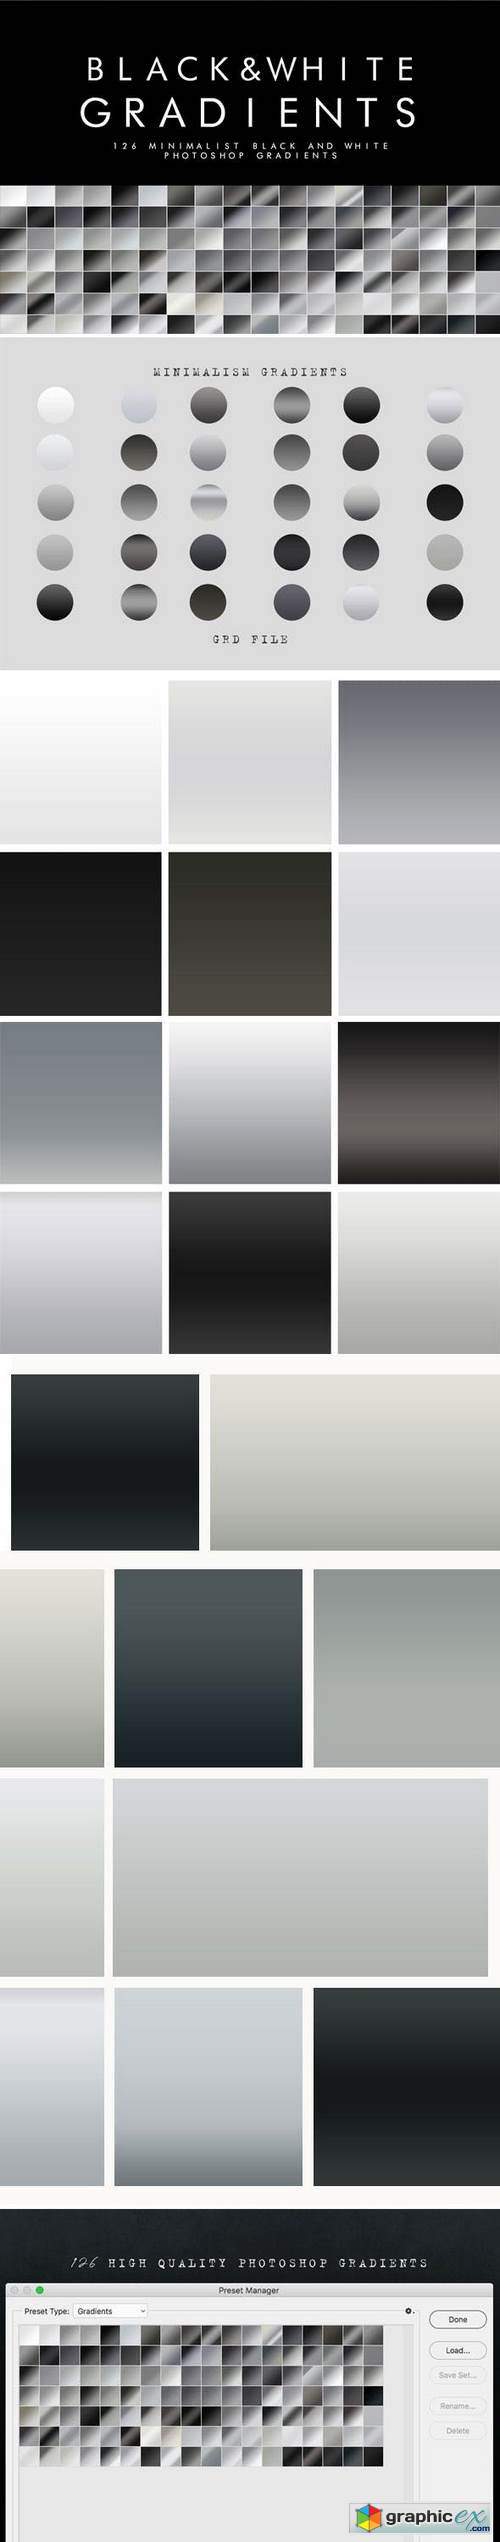 126 Black and White Gradients